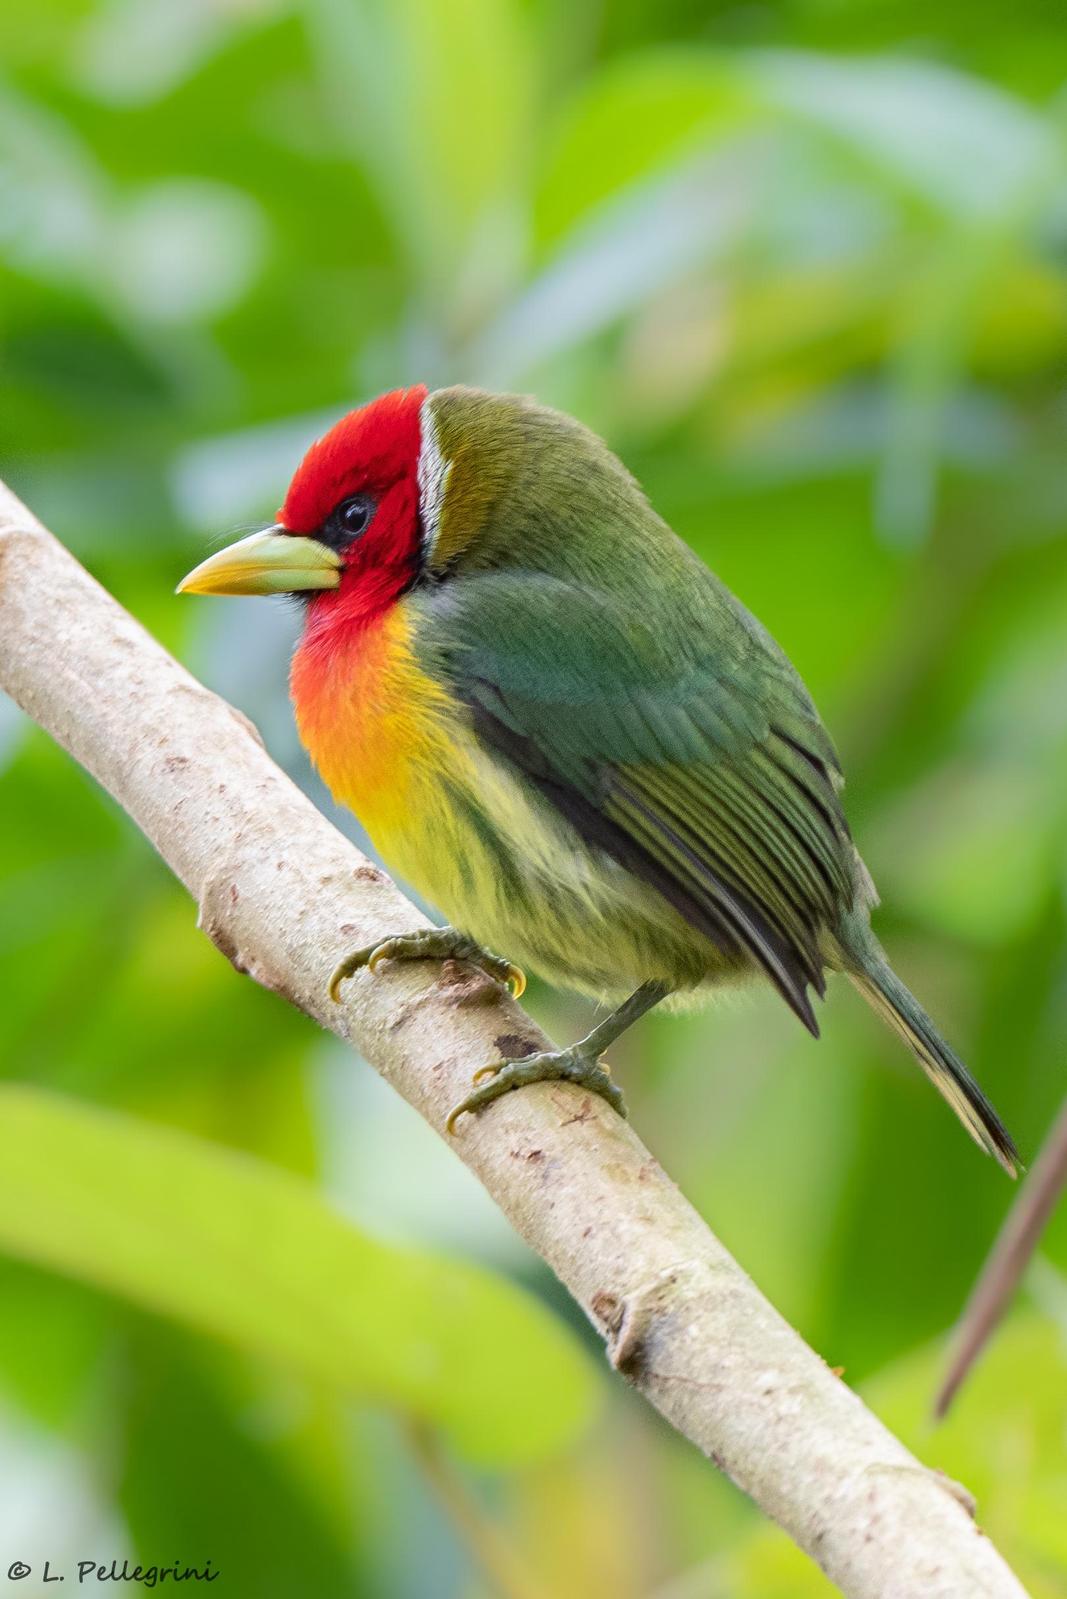 Red-headed Barbet Photo by Laurence Pellegrini